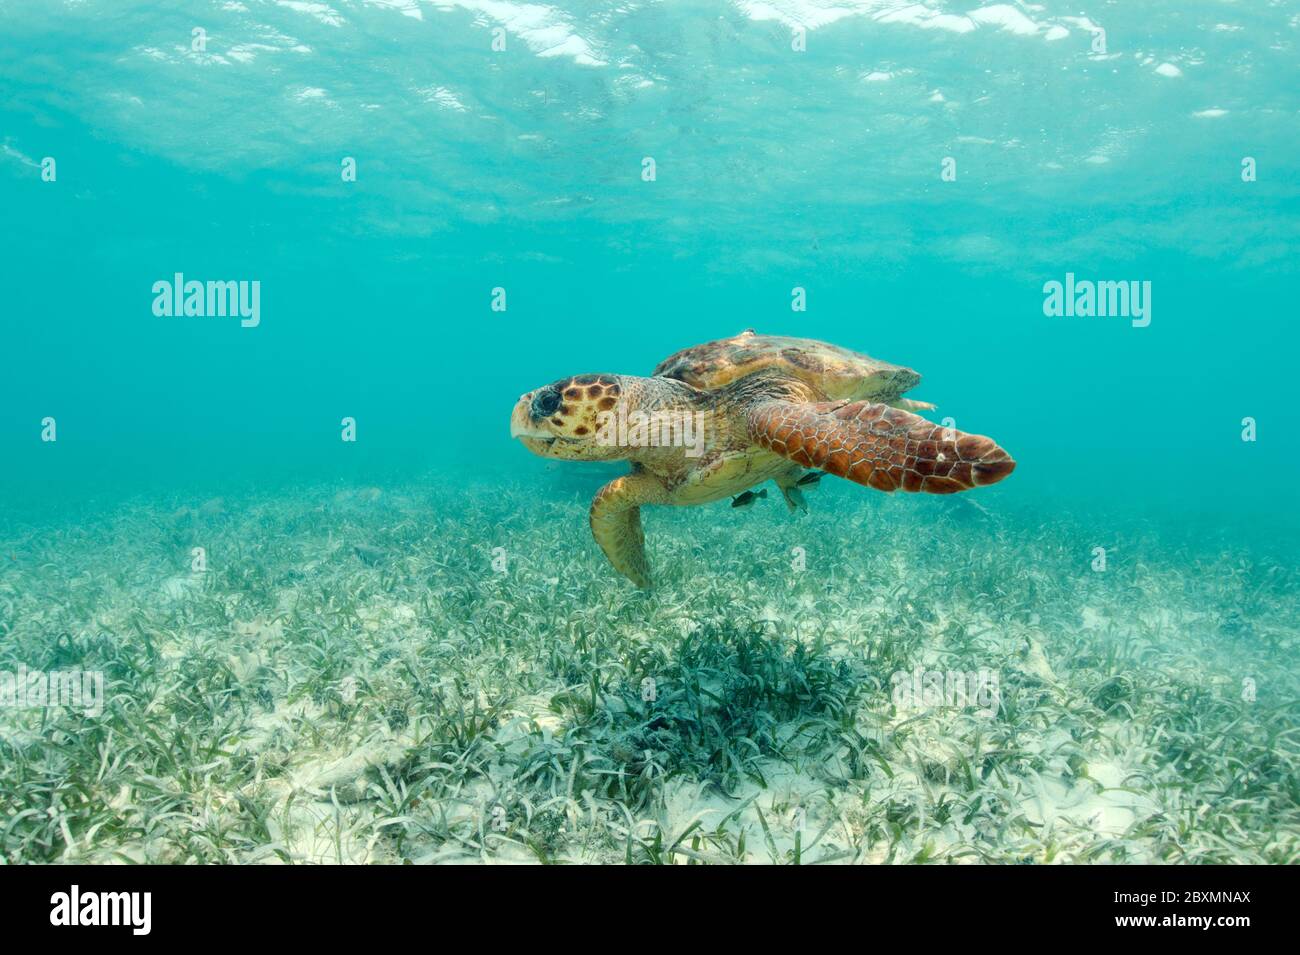 Loggerhead seaturtle is swimming underwater at the Belize Barrier Reef Stock Photo